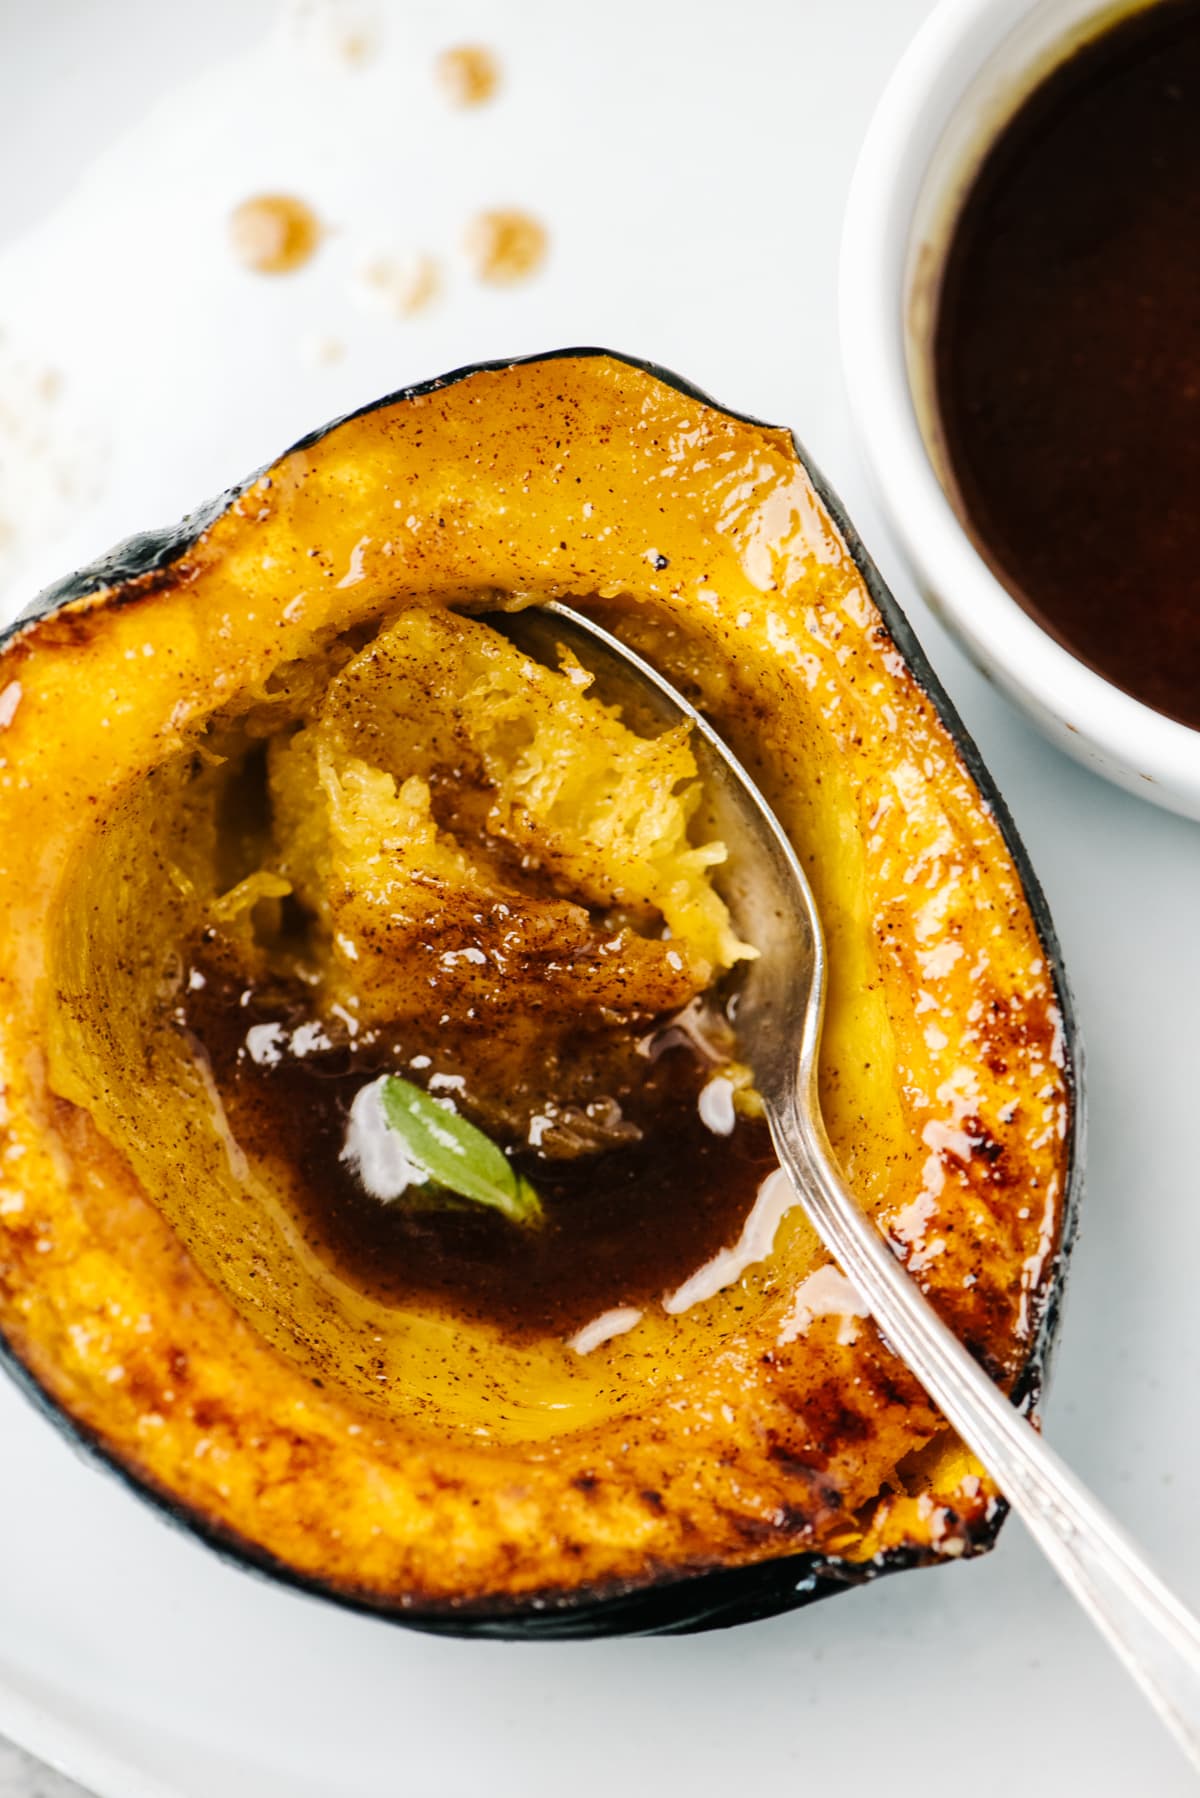 A spoon tucked into a roasted acorn squash half on a white plate.